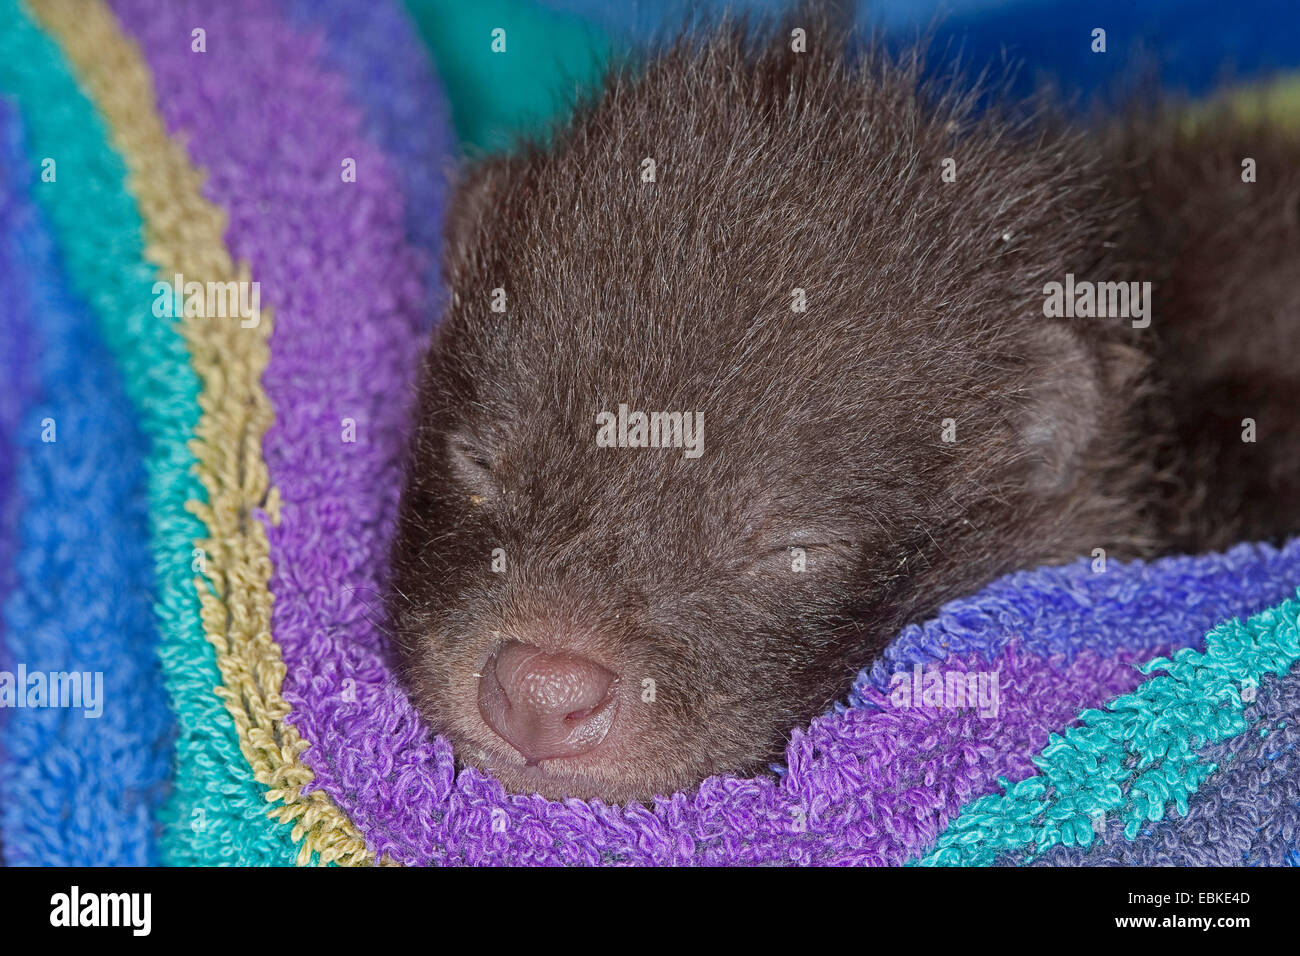 raccoon dog (Nyctereutes procyonoides), orphaned puppy sleeping in a towel, Germany Stock Photo